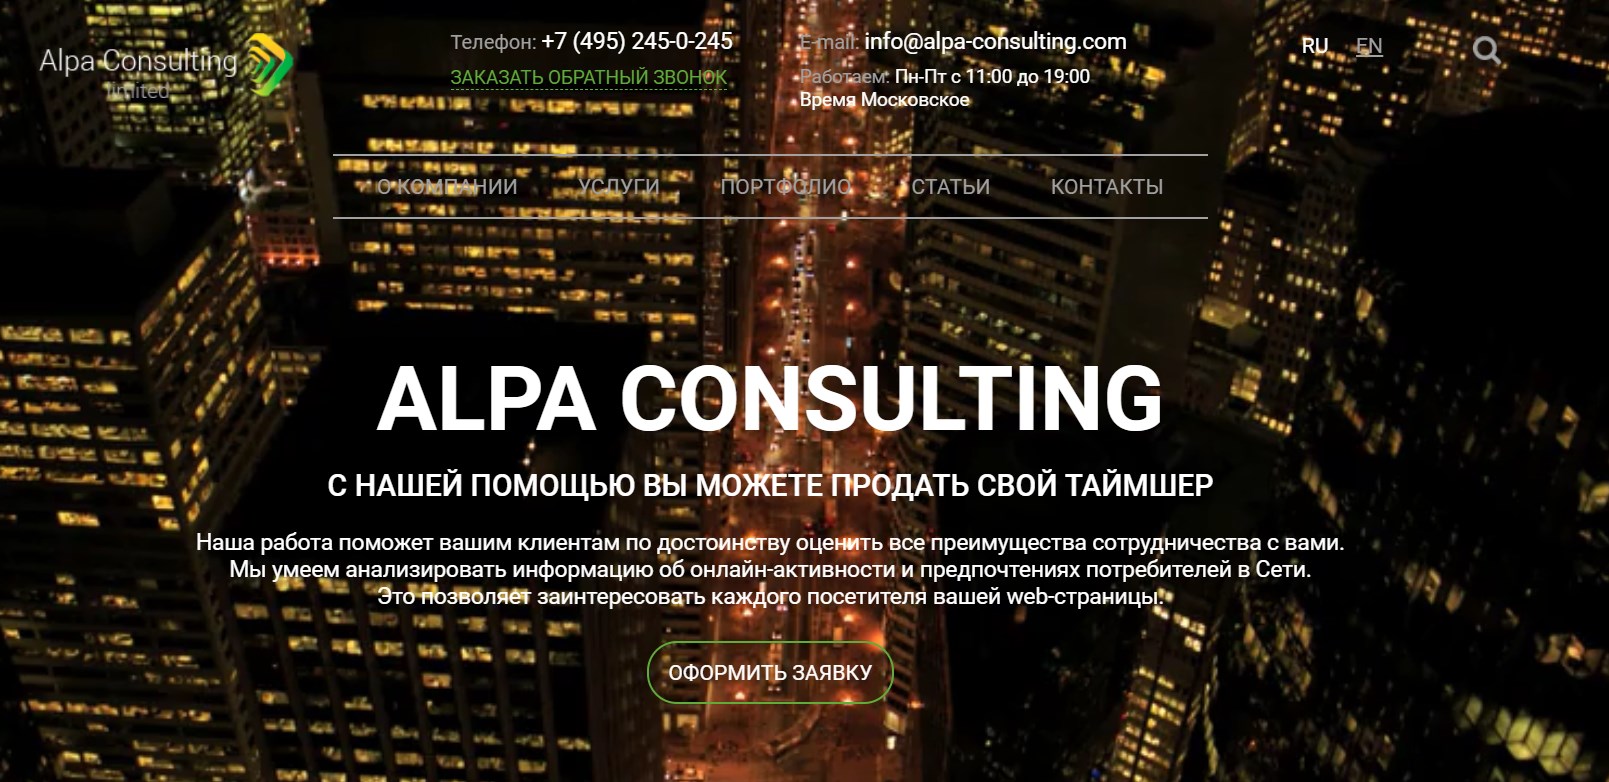 495 245. Consulting Company BCG.